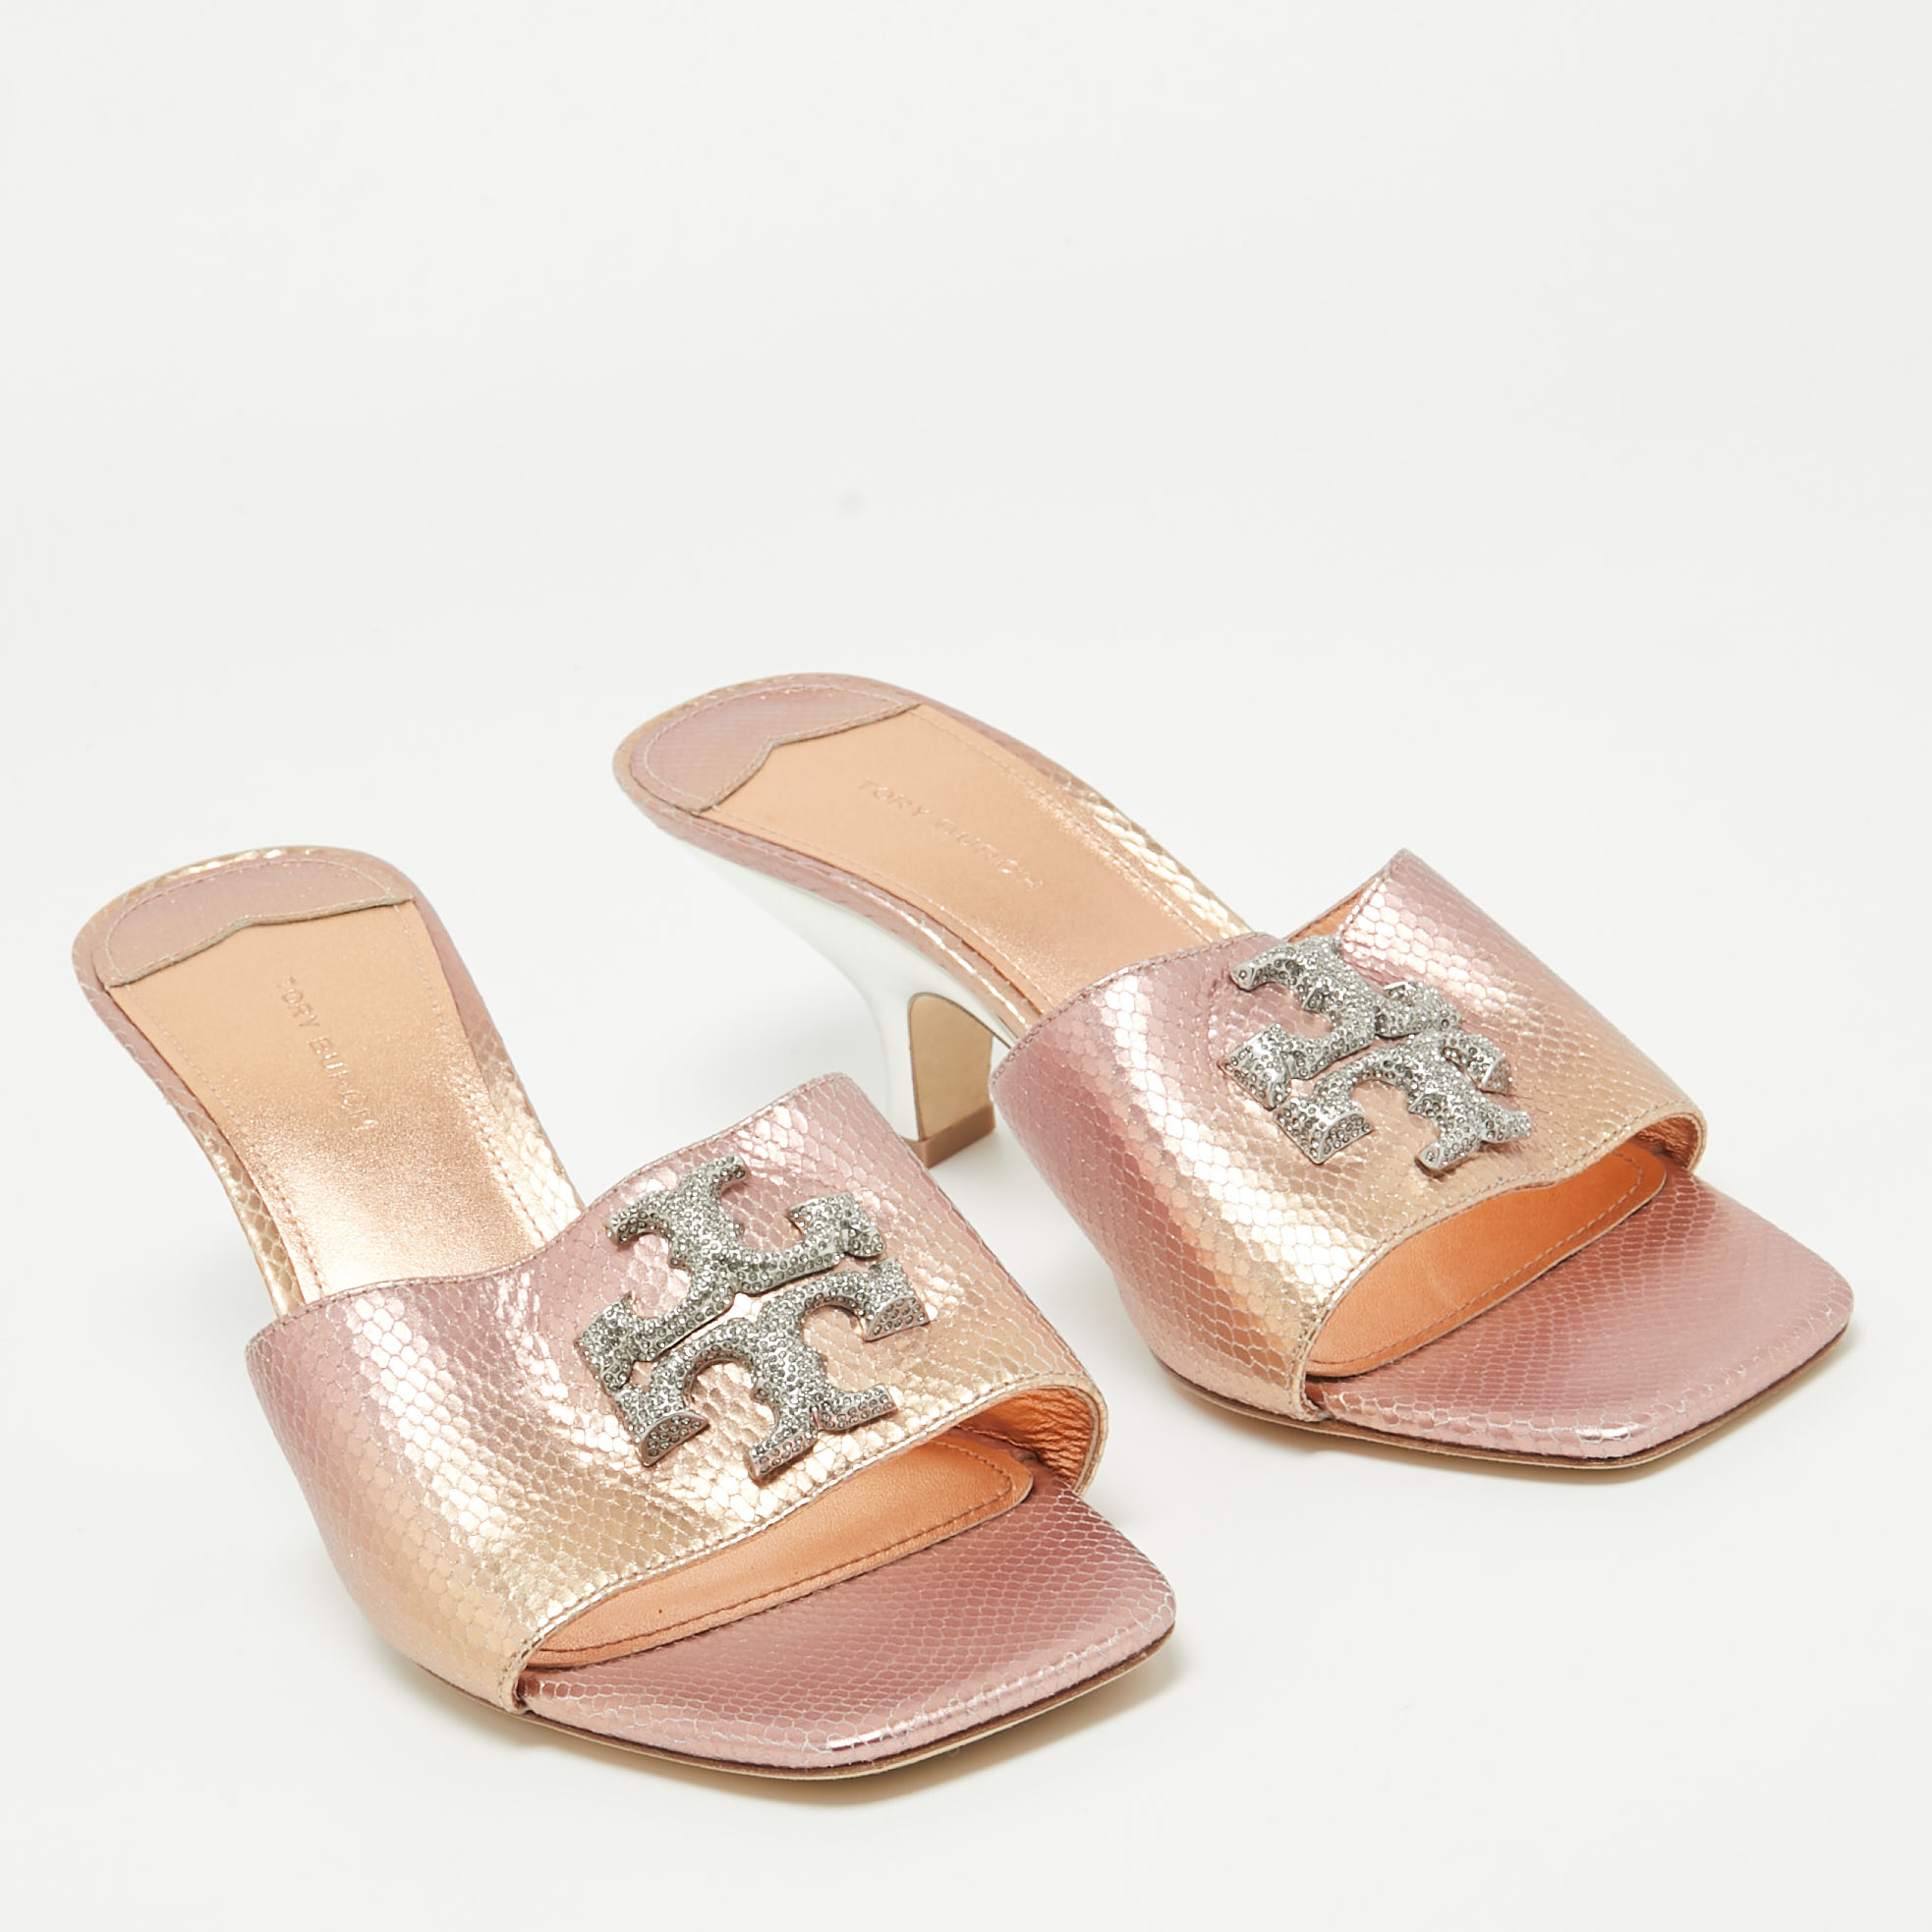 Tory Burch Rosegold Lizard Embossed Leather Ines Slides Size 39.5